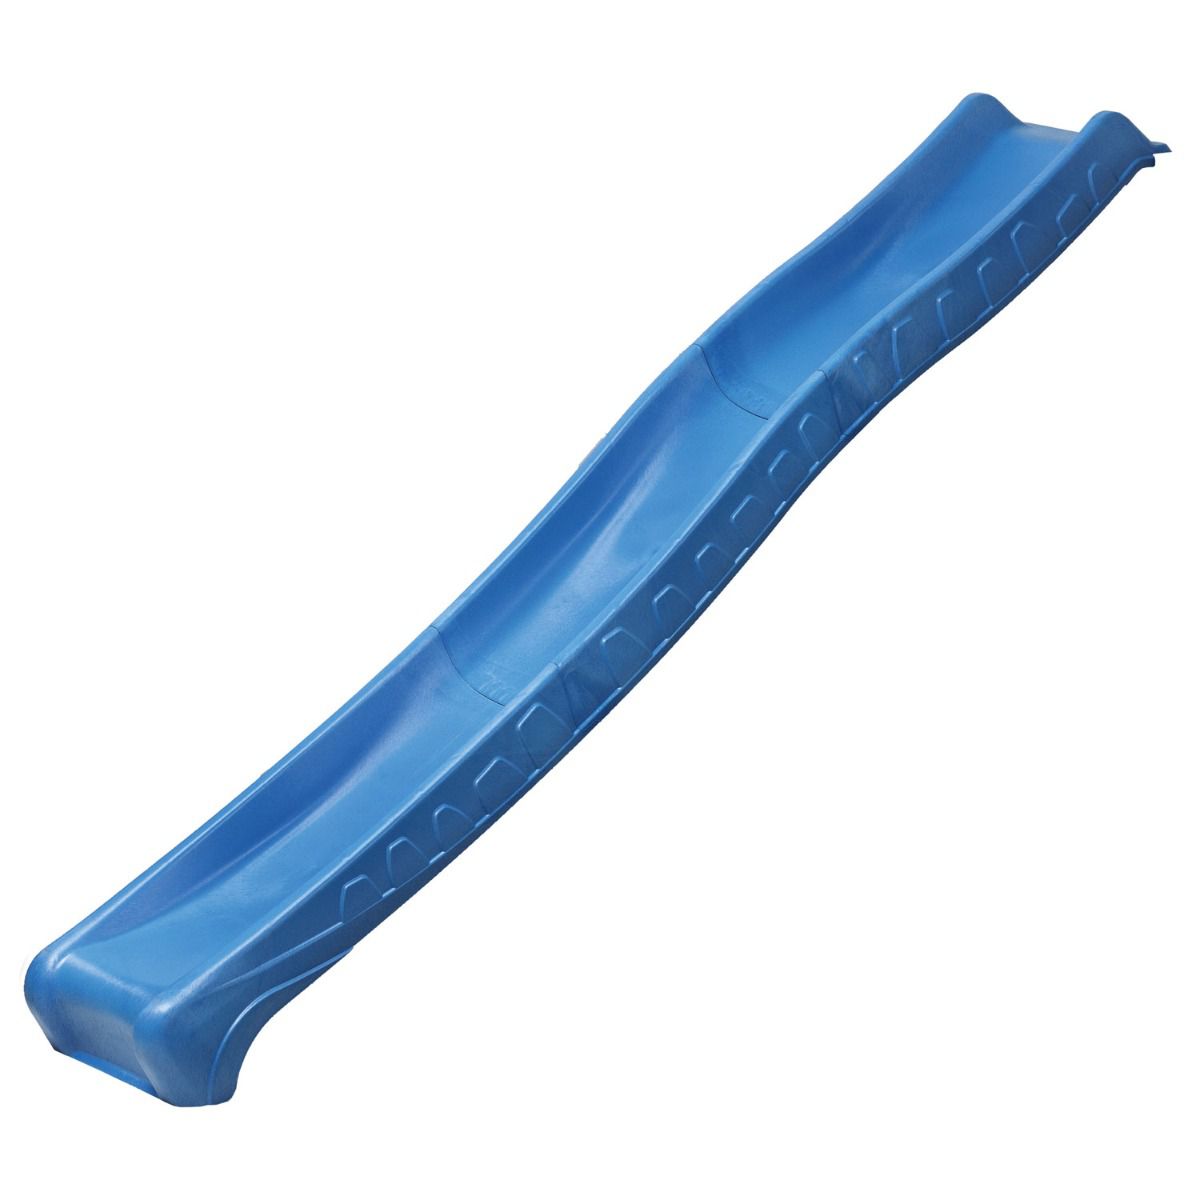 Slide with water connection - Length 2.87 m - Color: Blue